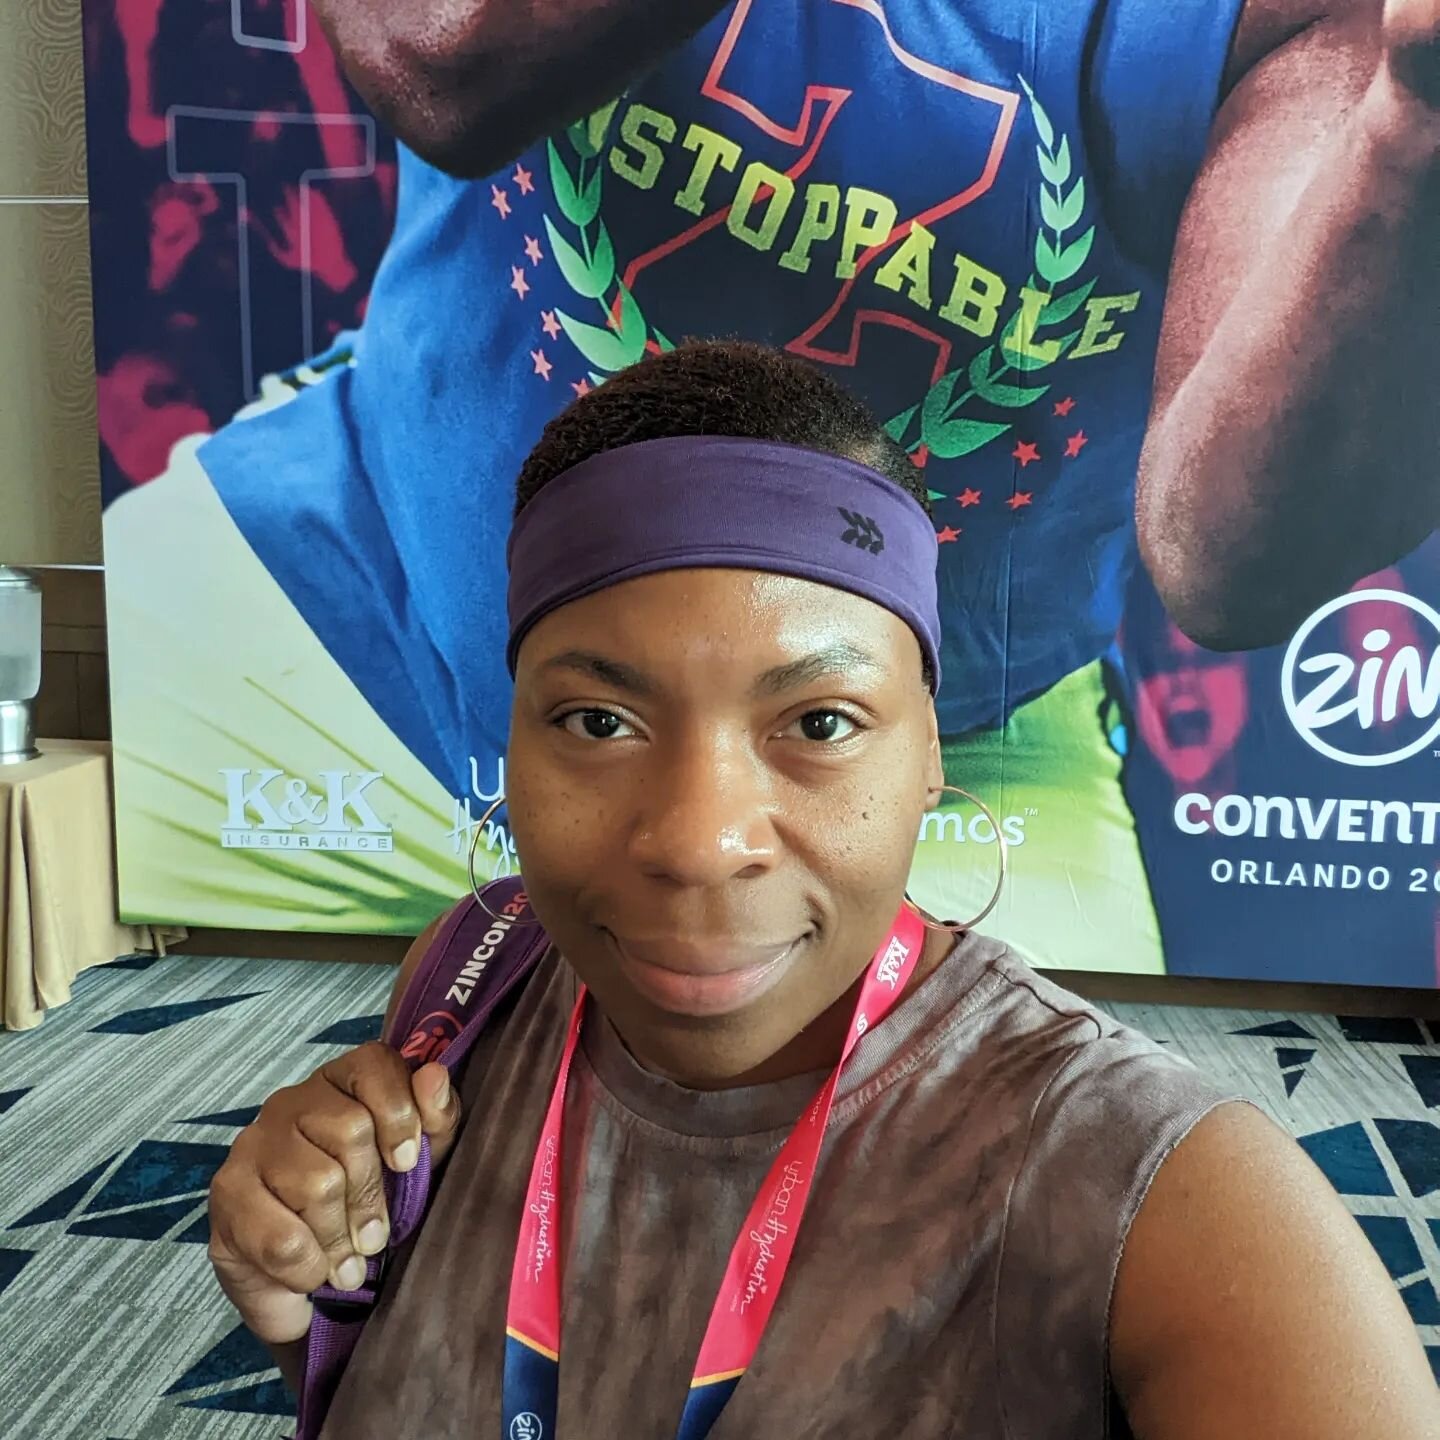 Had a great time at Zincon and Sync Summit.... can't wait to bring you guys what I learned. 

New classes coming soon!

#strongnation #zincon2022 #zumbafitness #strongnationinstructor